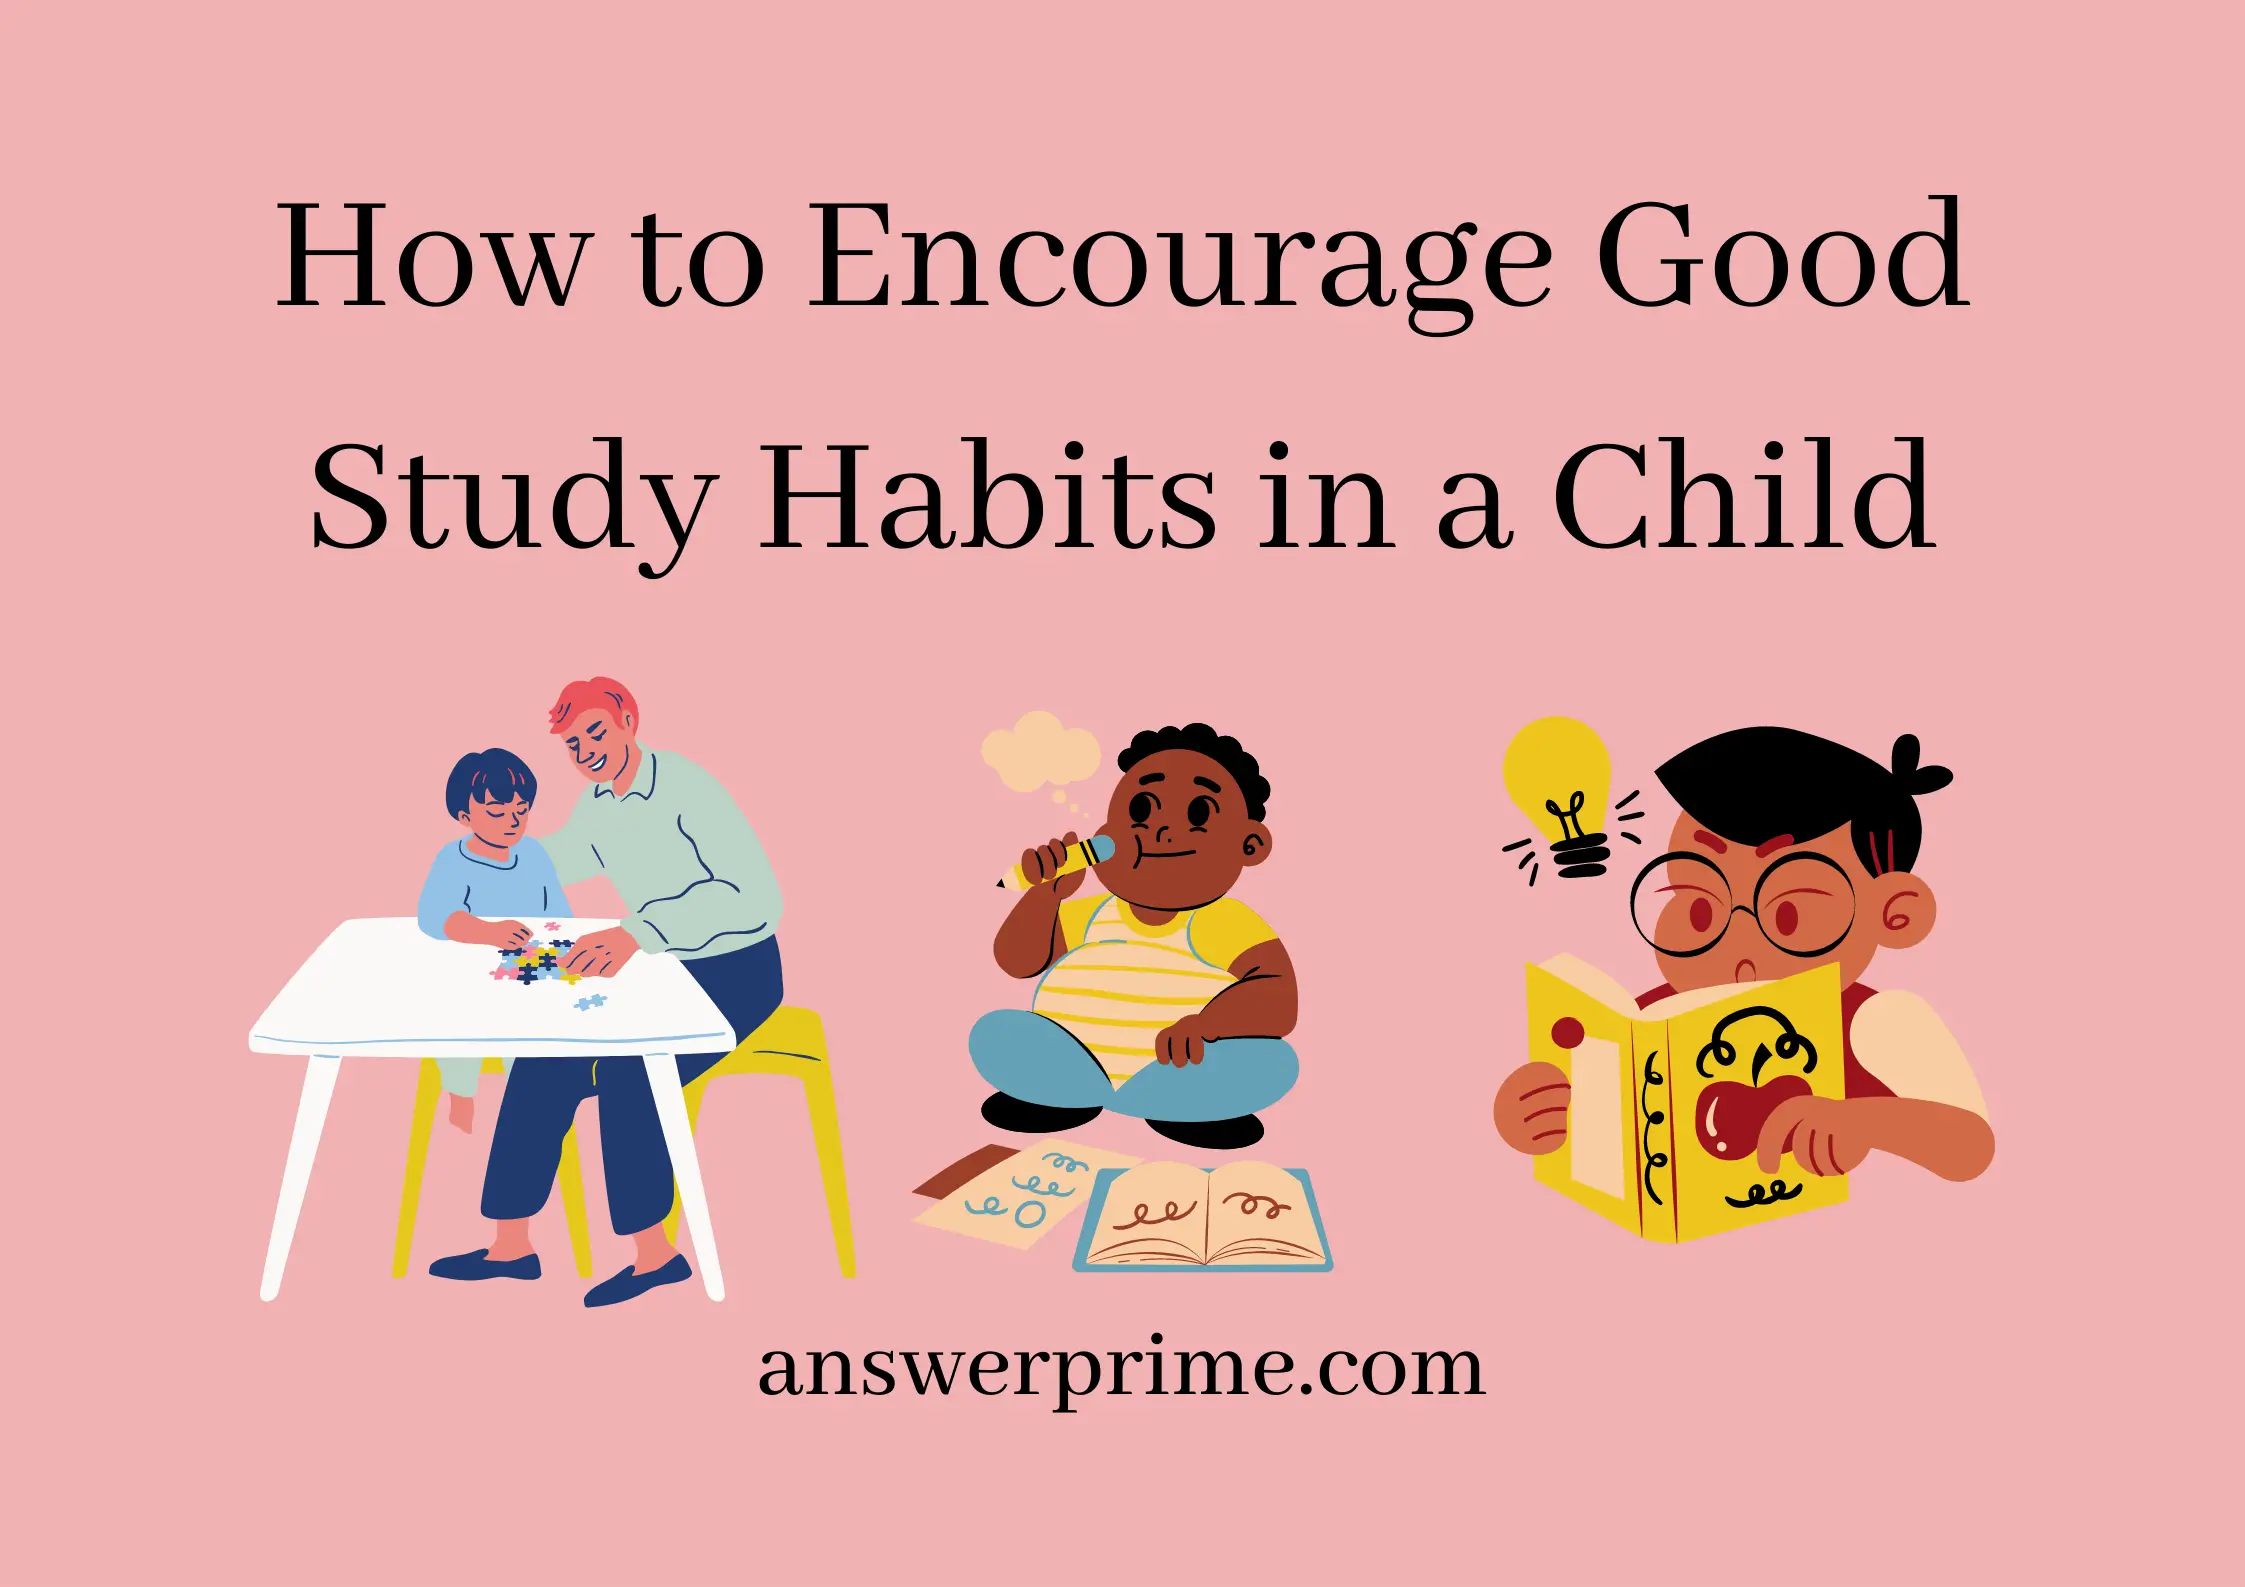 How to Encourage Good Study Habits in a Child